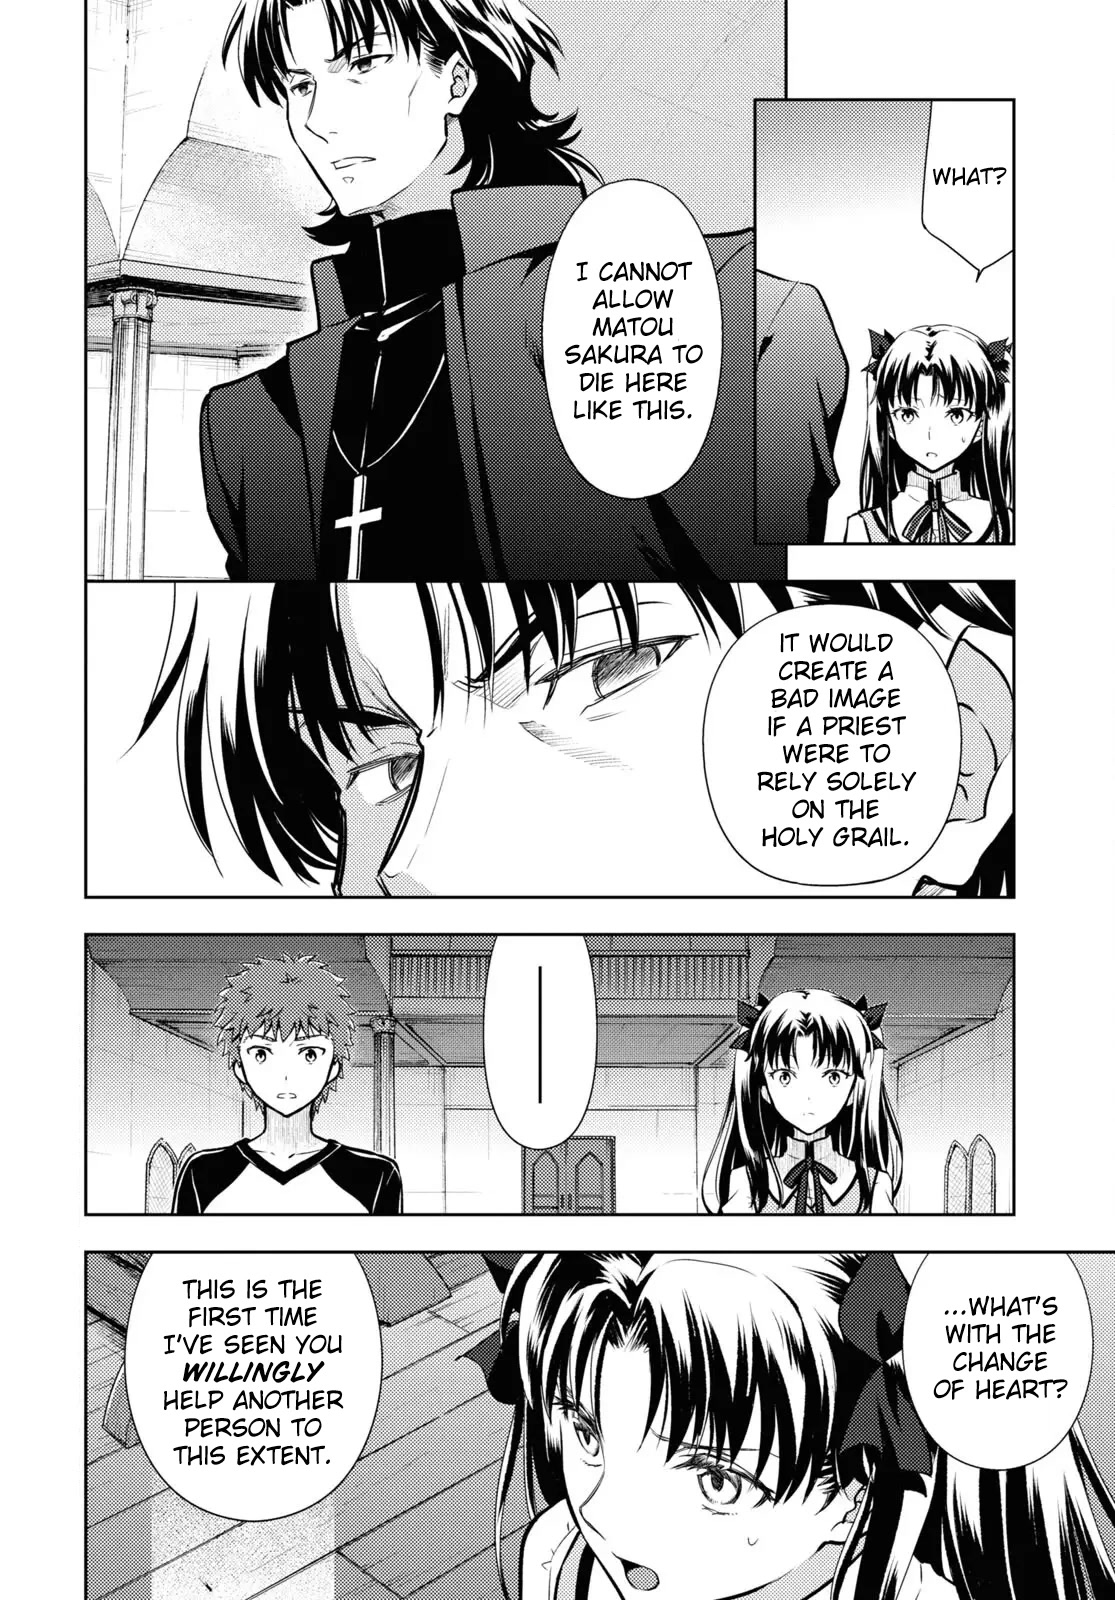 Fate/stay Night - Heaven's Feel - Page 2